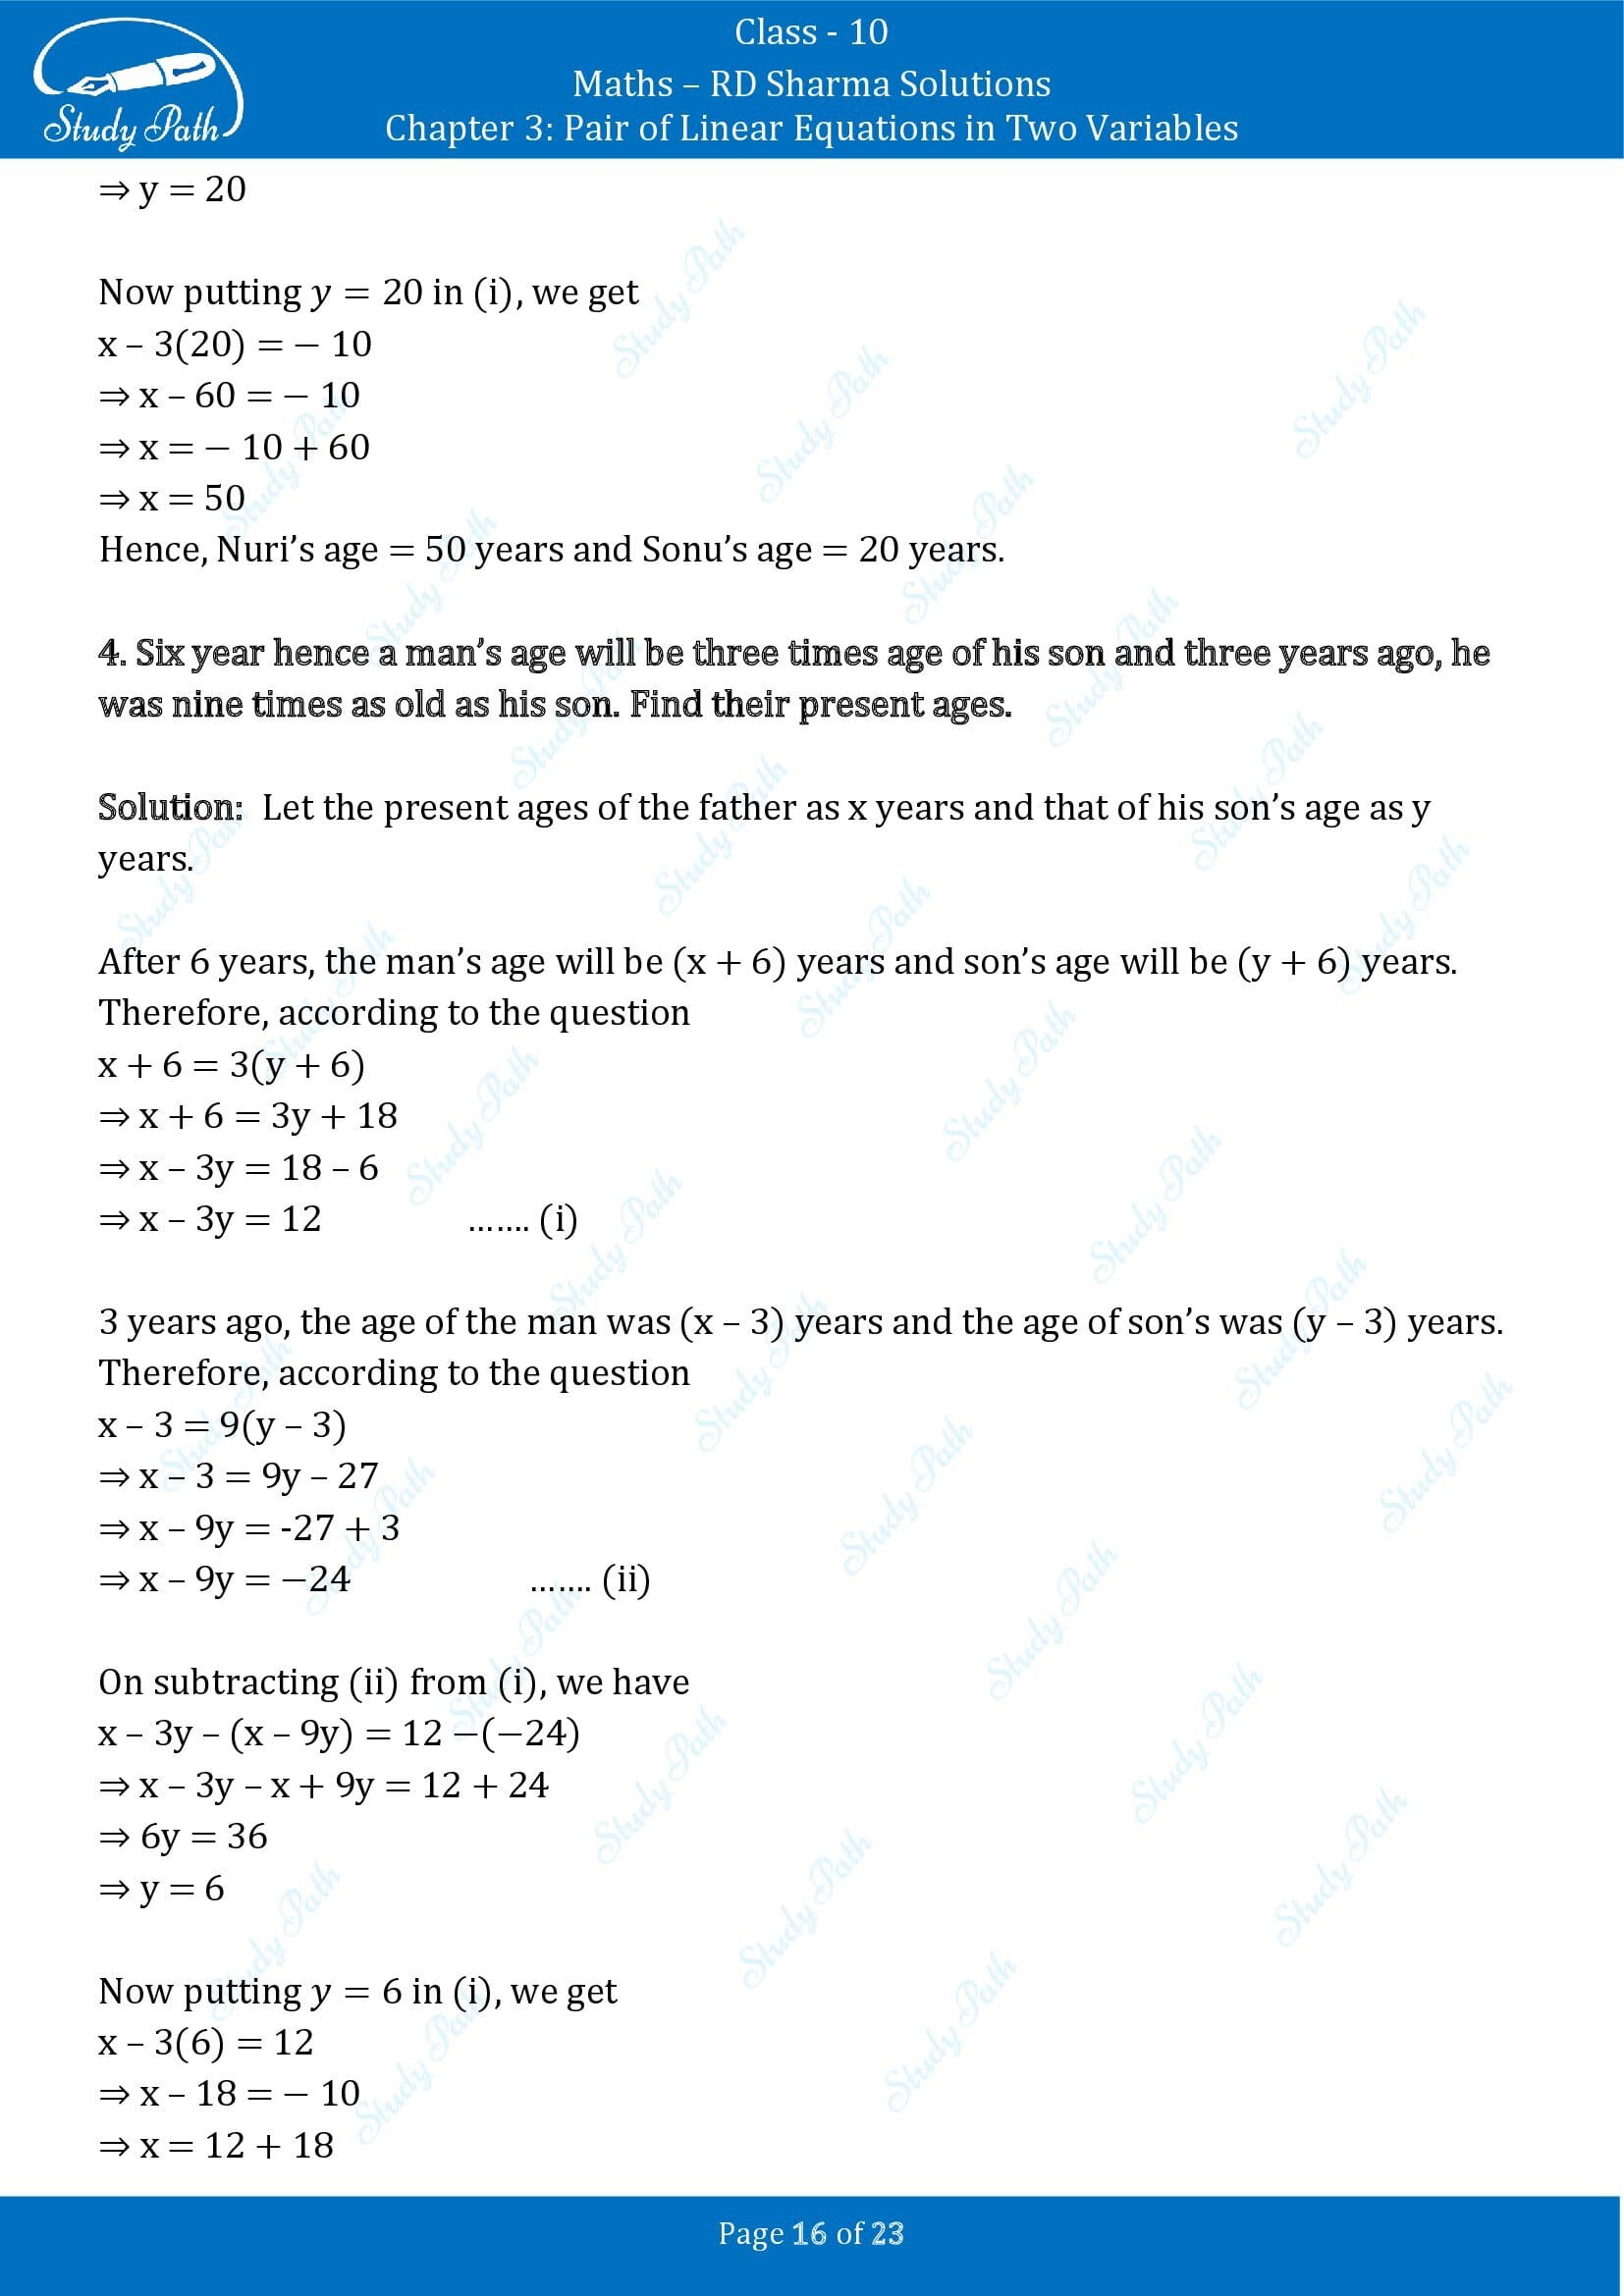 RD Sharma Solutions Class 10 Chapter 3 Pair of Linear Equations in Two Variables Exercise 3.8 00016